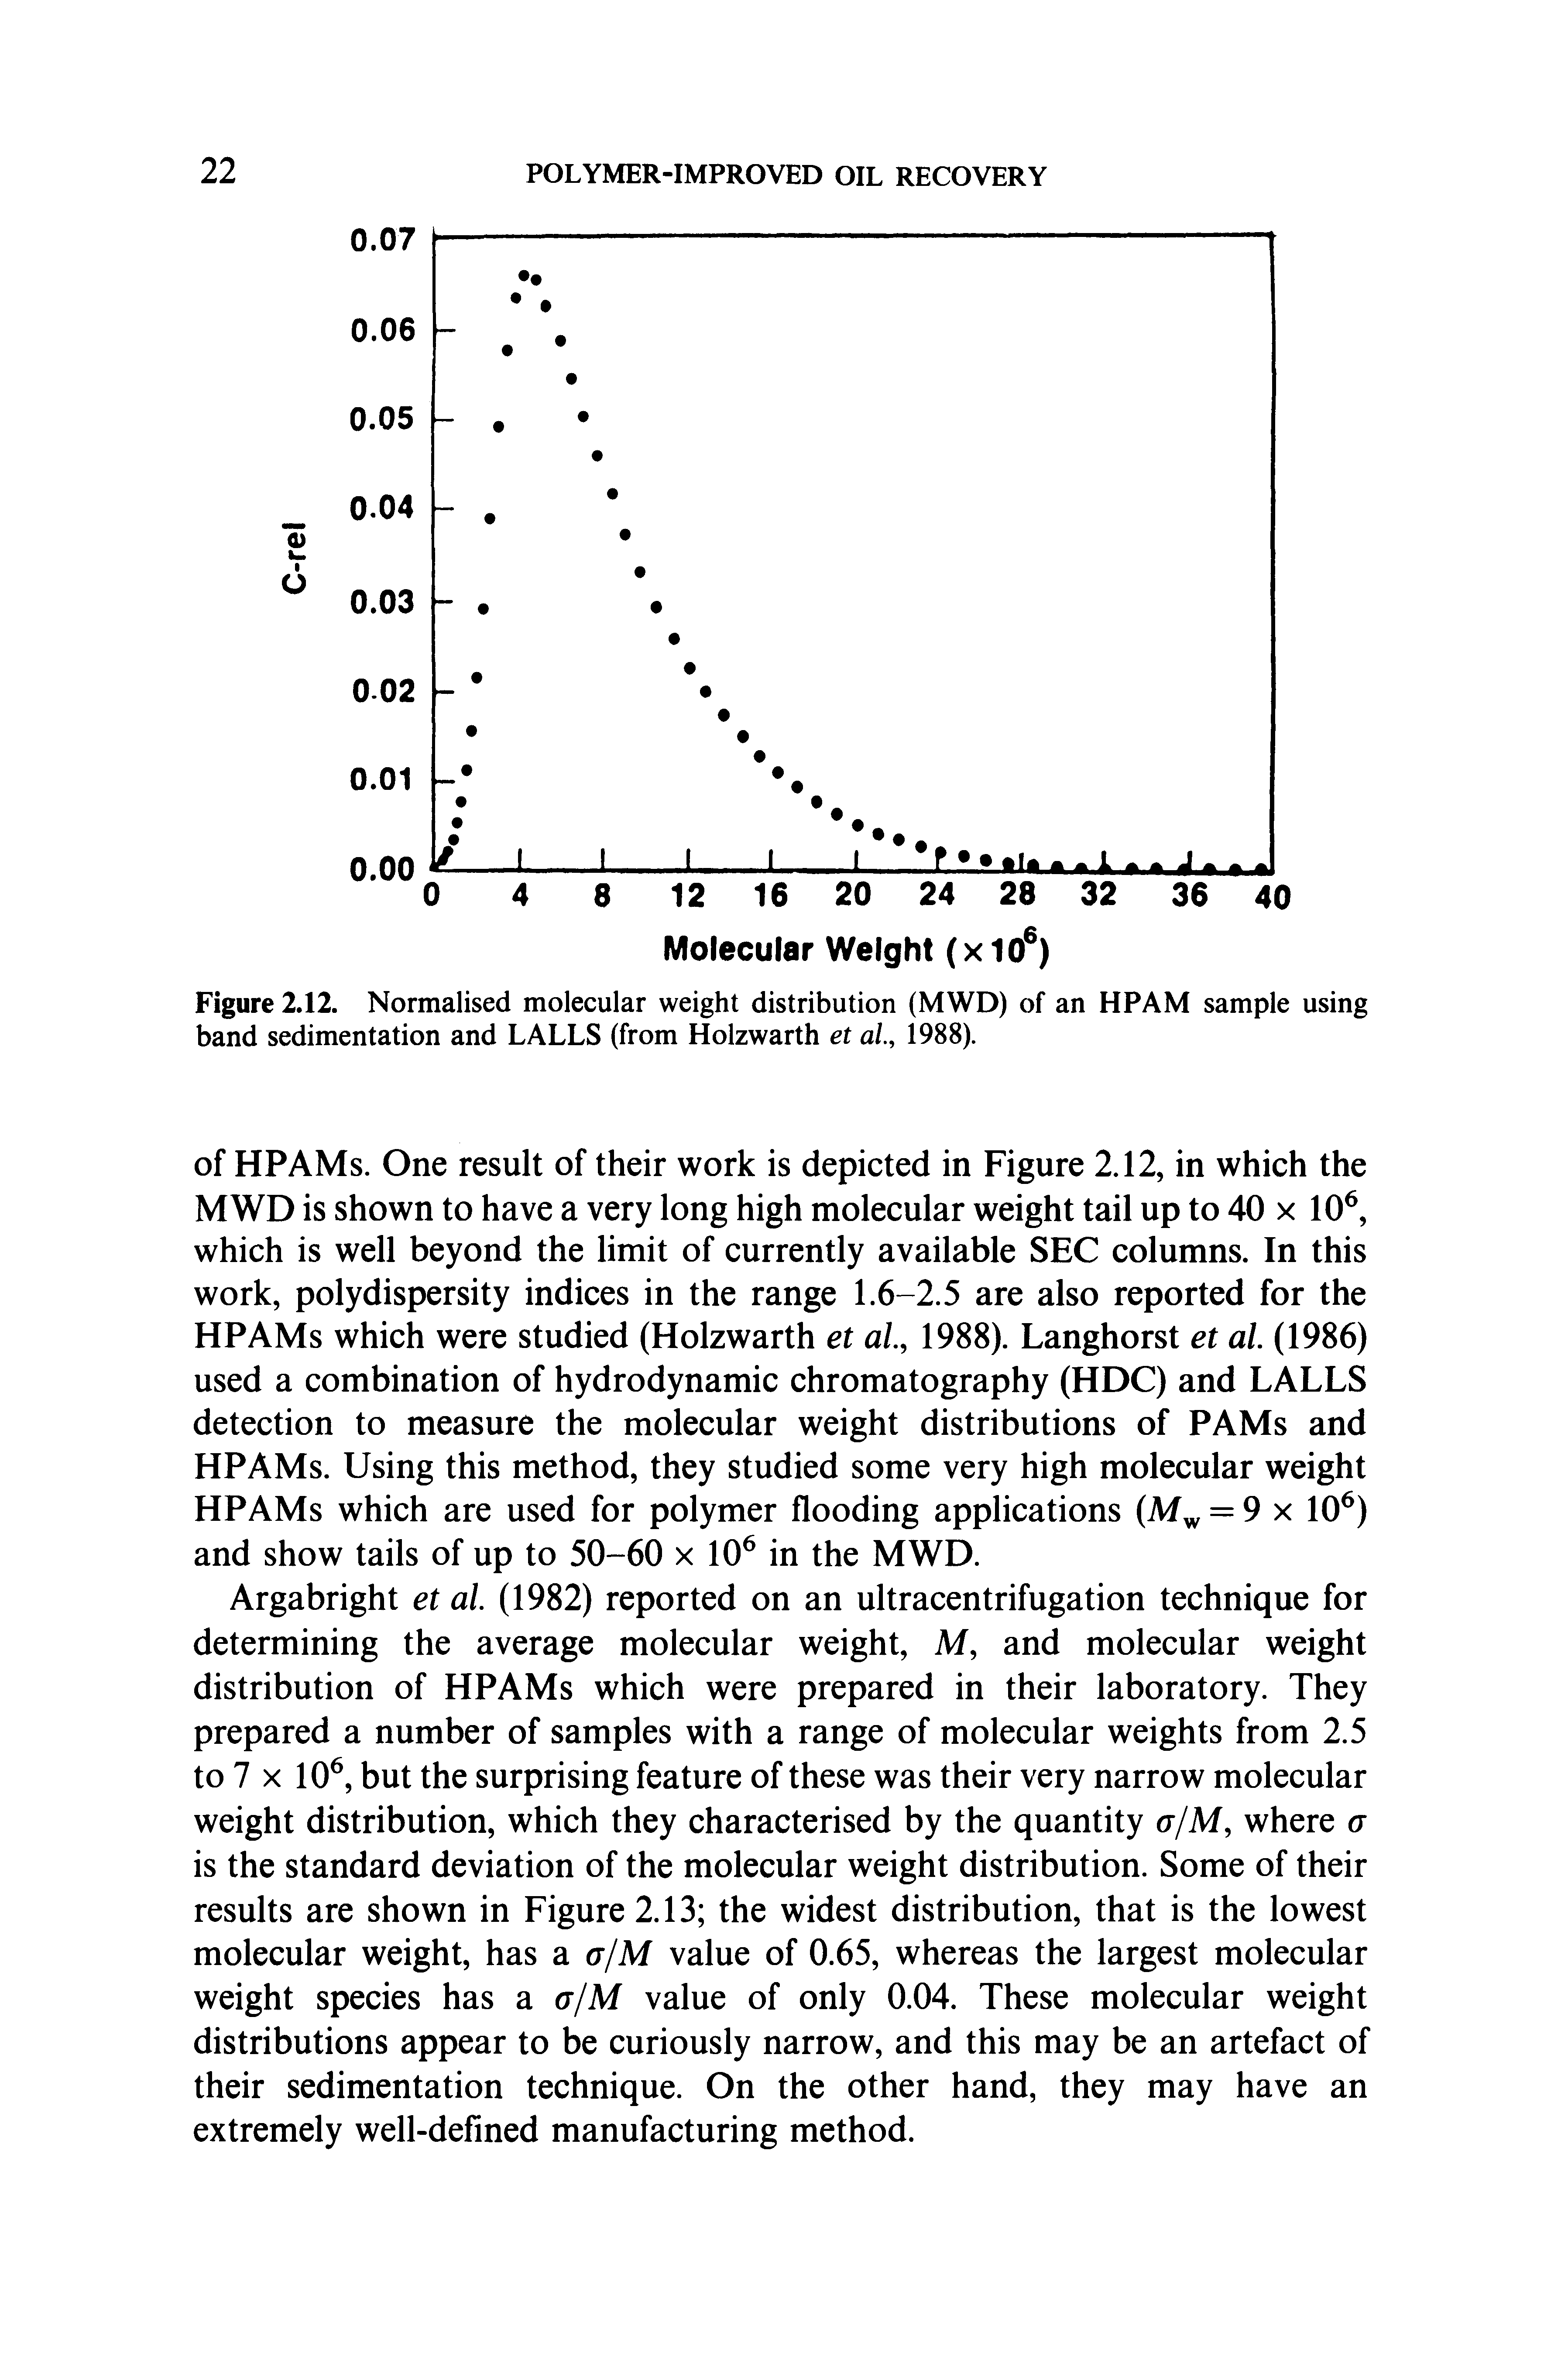 Figure 2.12. Normalised molecular weight distribution (MWD) of an HPAM sample using band sedimentation and LALLS (from Holzwarth et a/., 1988).